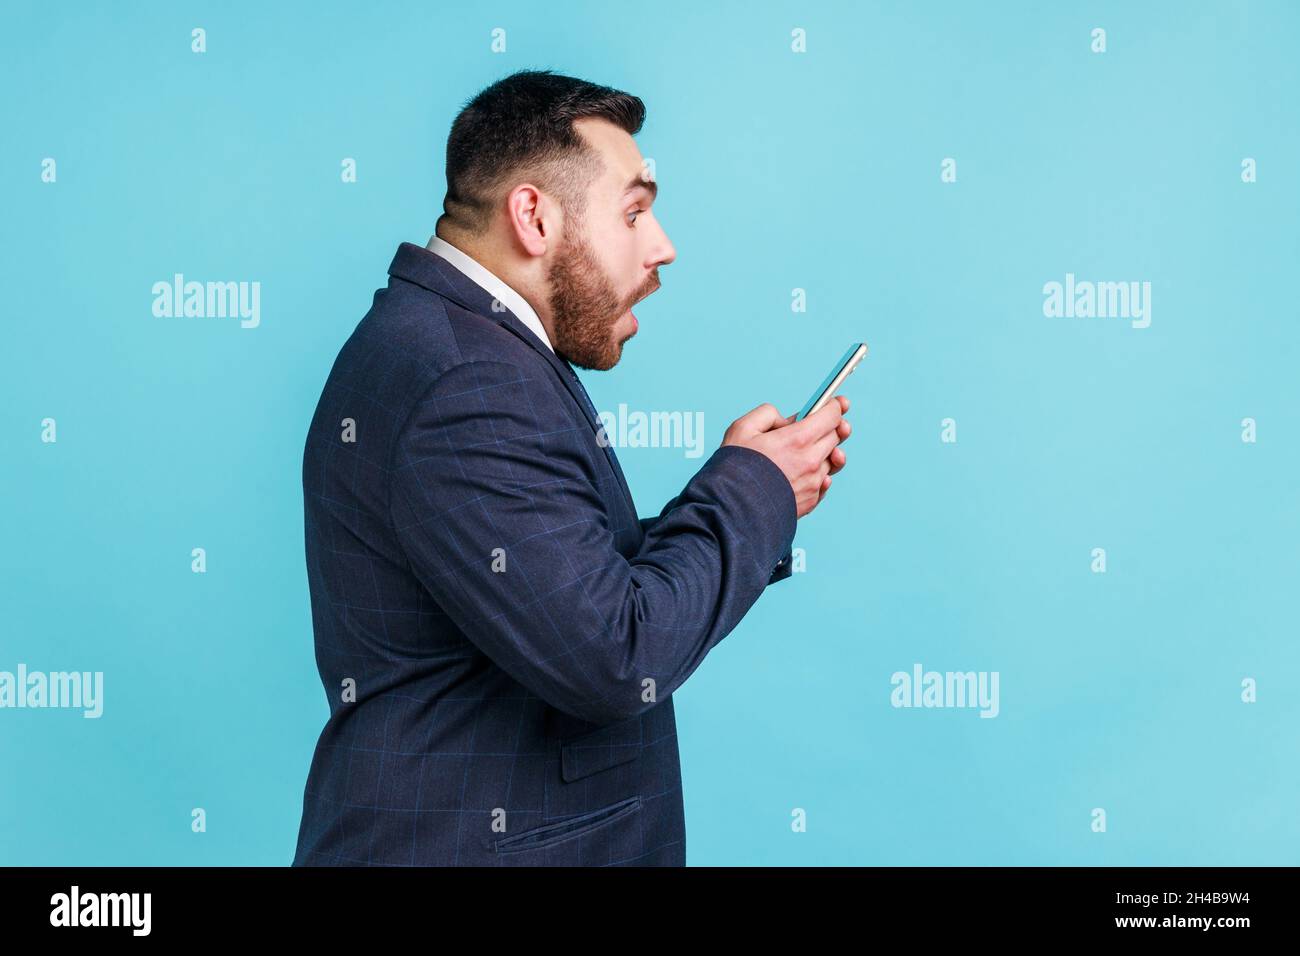 Side view of amazed businessman wearing dark official style suit using online service on mobile phone and expressing amazement, shock. Indoor studio shot isolated on blue background. Stock Photo